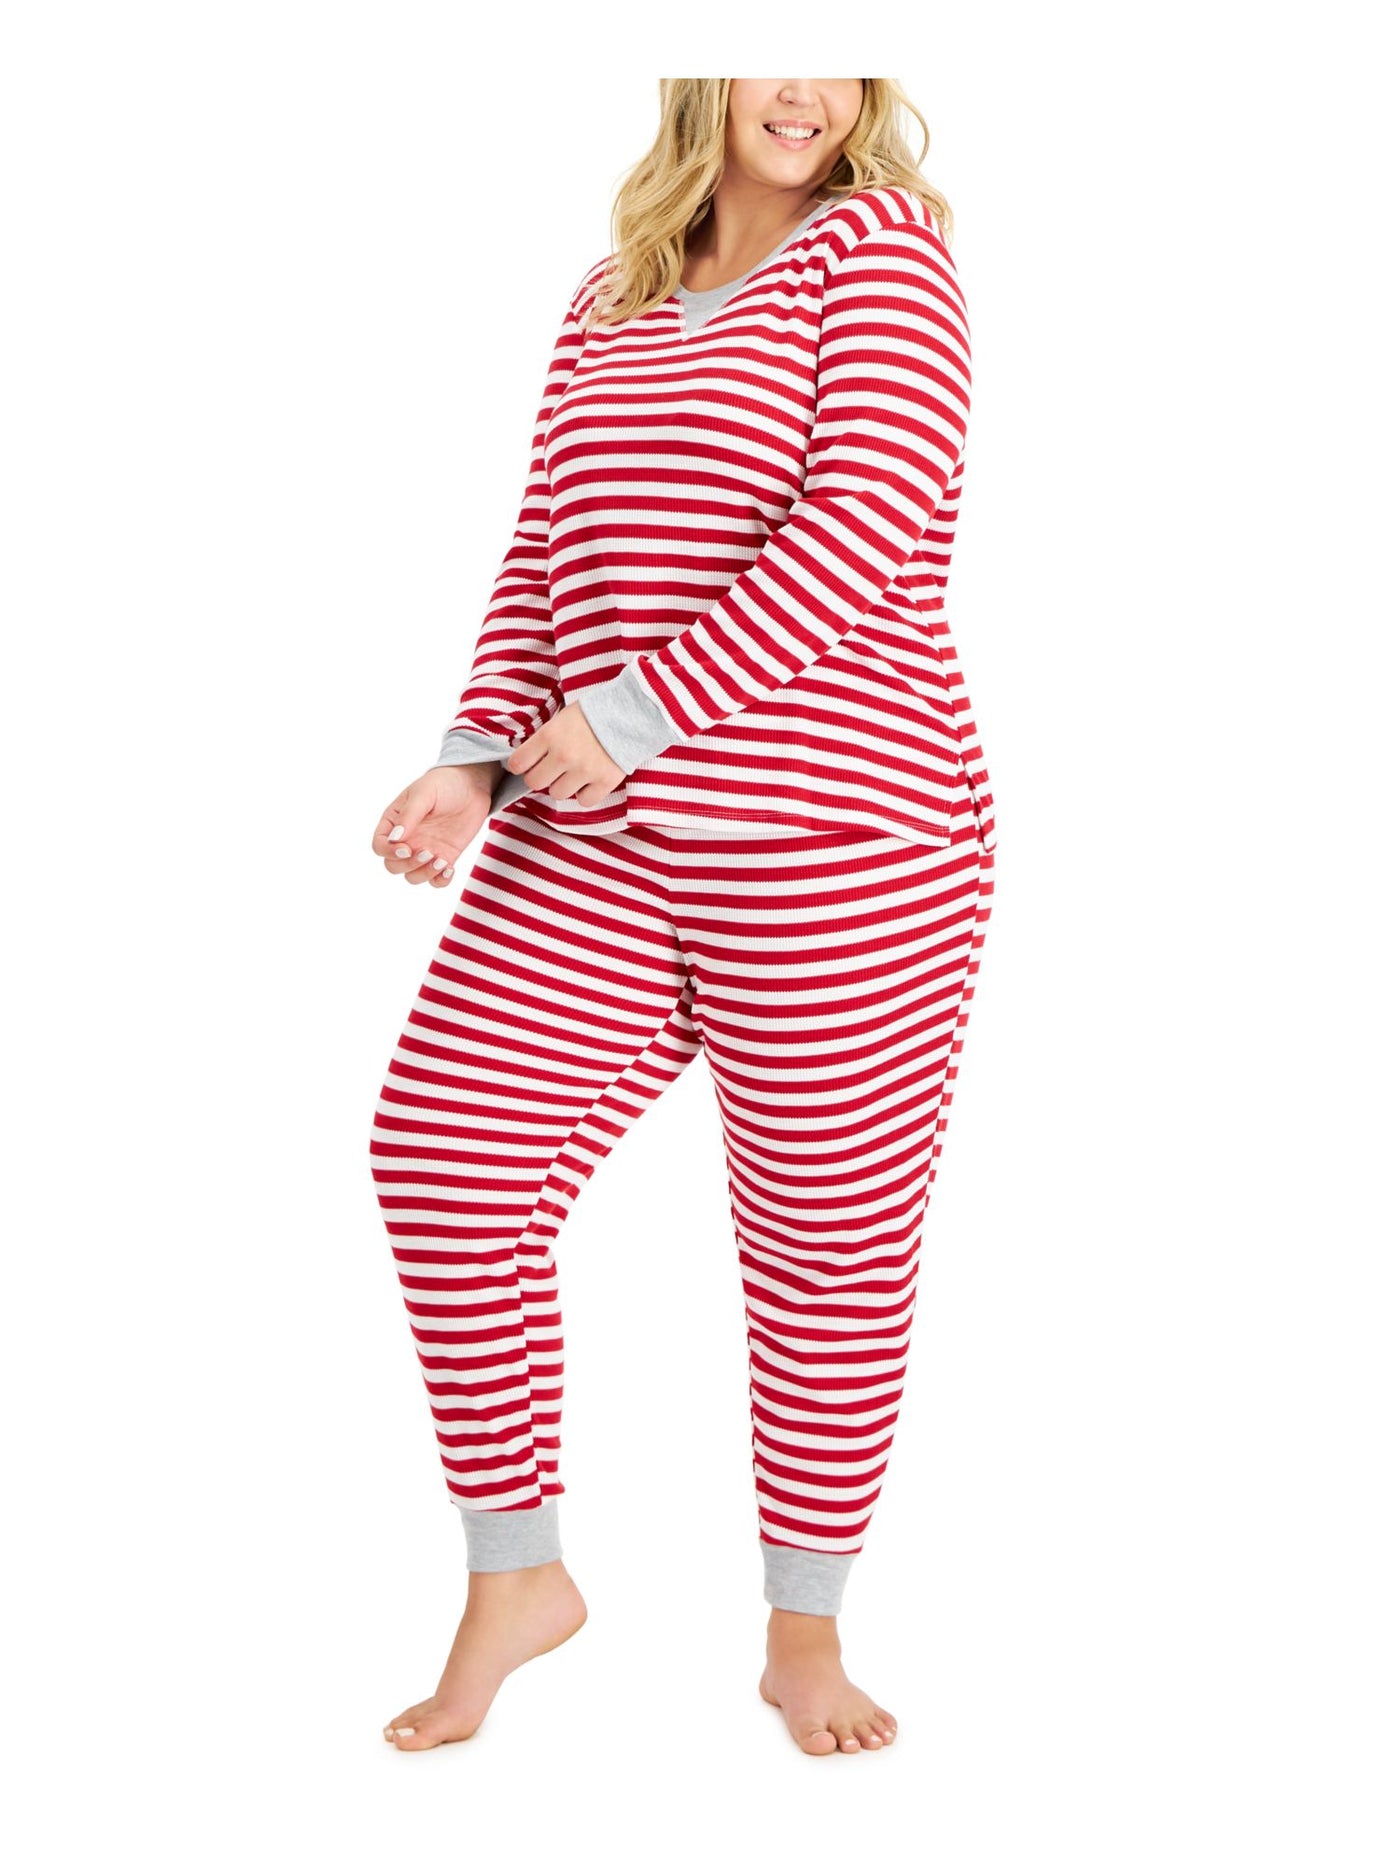 FAMILY PJs Womens Red Striped Top Long Sleeve Cuffed Pants Stretch Pajamas Plus 1X